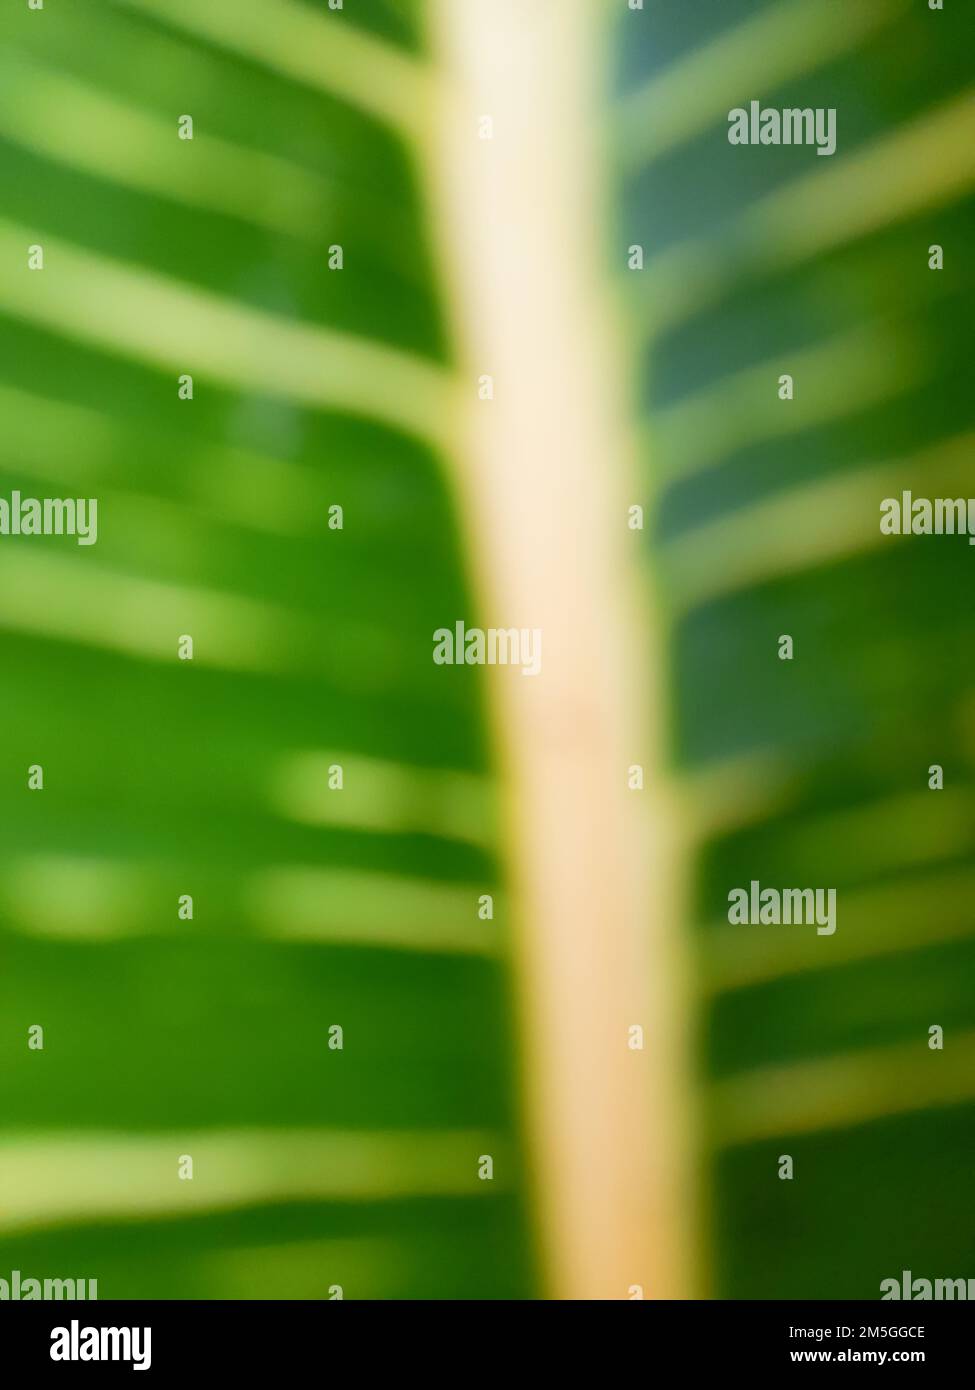 Close up. Blur photo or defocused abstract background of green leaves and yellow veins. Wallpaper or backgrounds. Summer Stock Photo